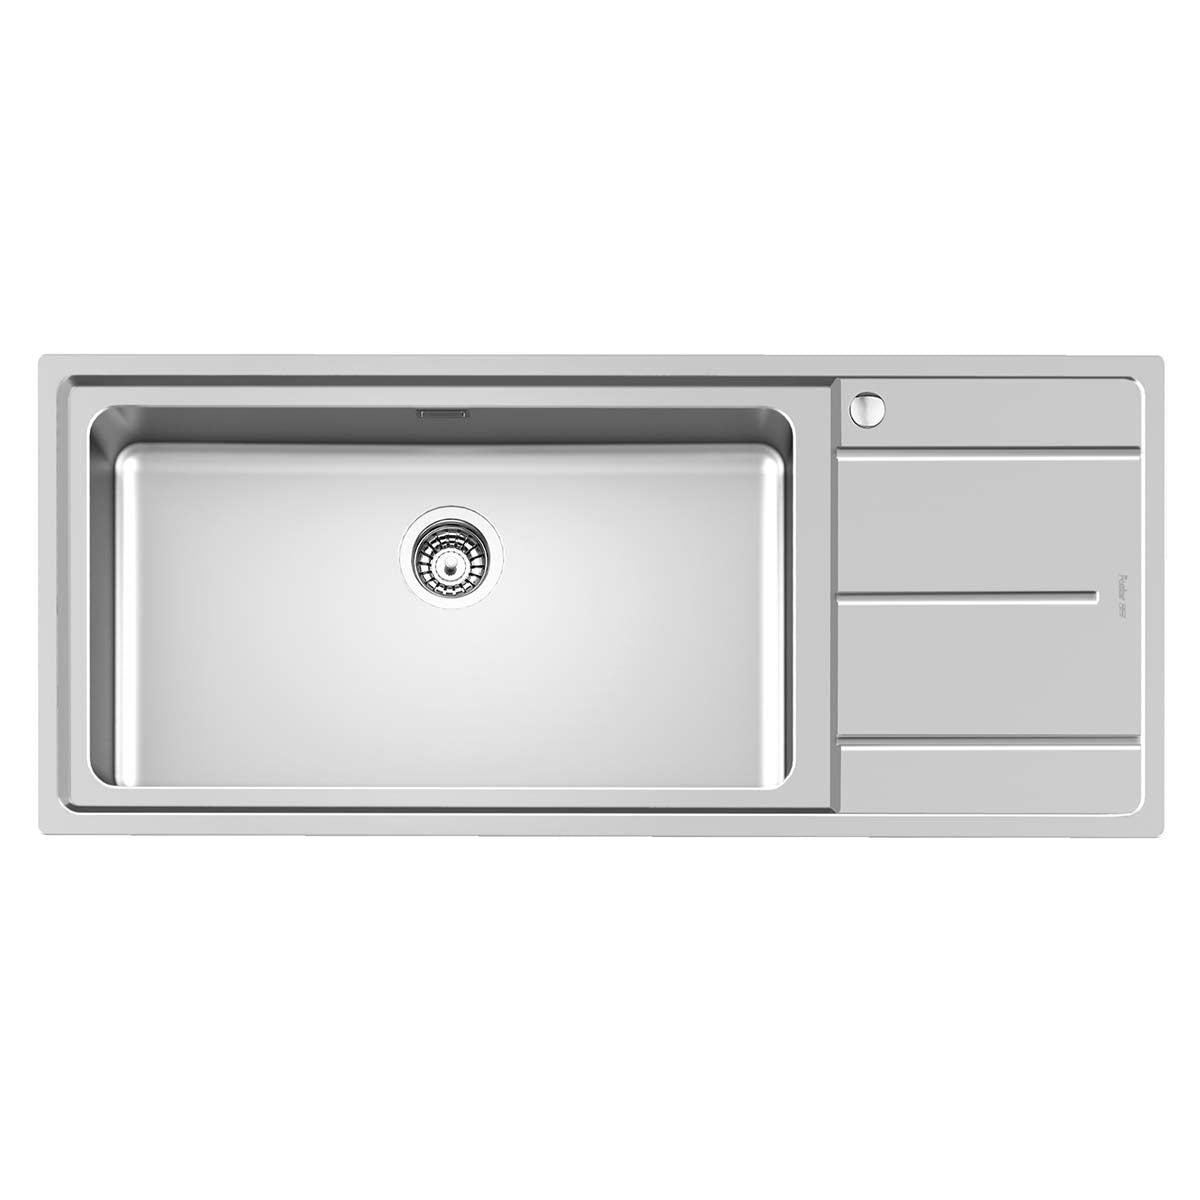 Foster Evo Kitchen Sink with Draining Board Left Handed 1160x500mm Brushed Stainless Steel